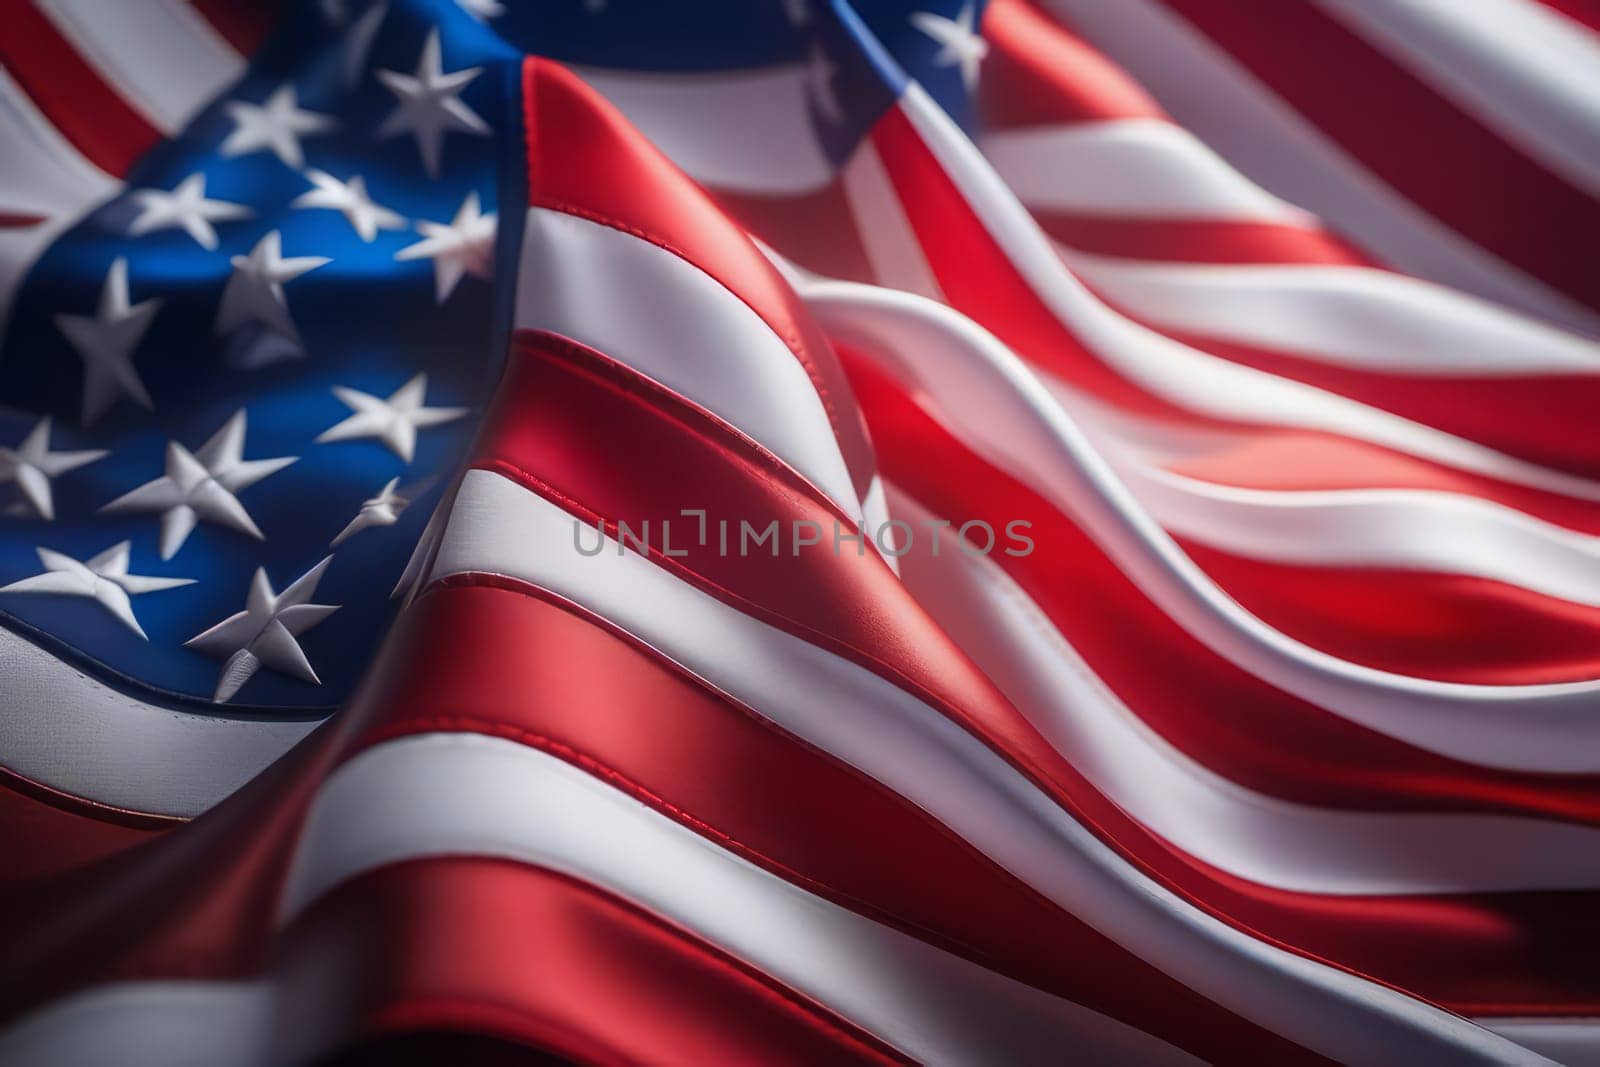 An intimate close-up shot capturing the intricate details of the American flag, symbolizing patriotism and national pride